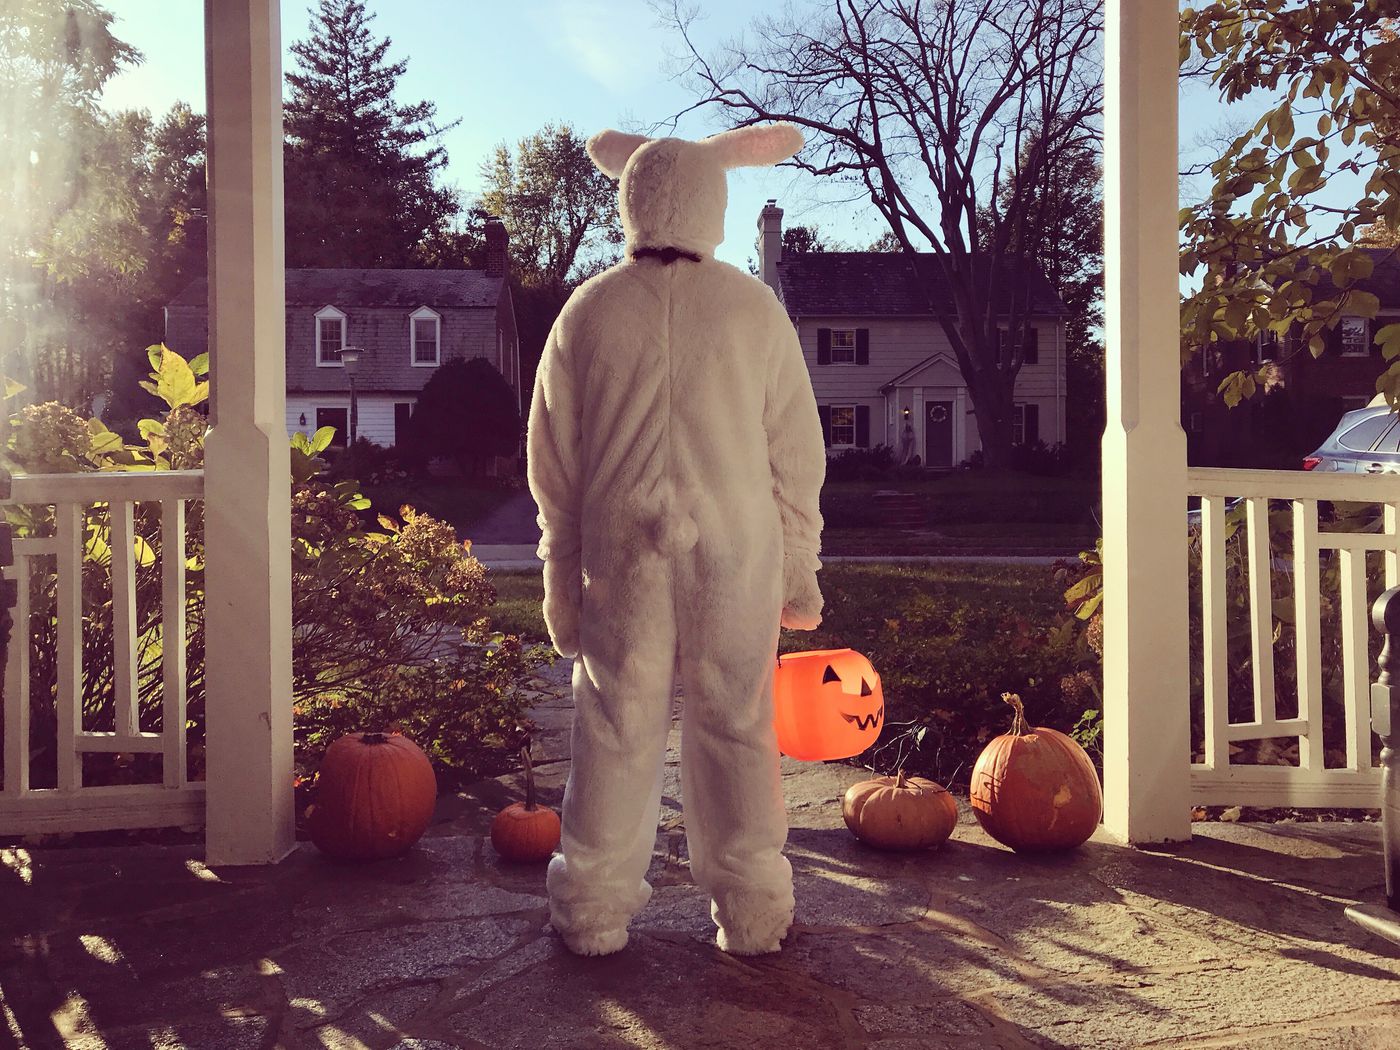 Stock image of a child in a bunny costume Trick-Or-Treating